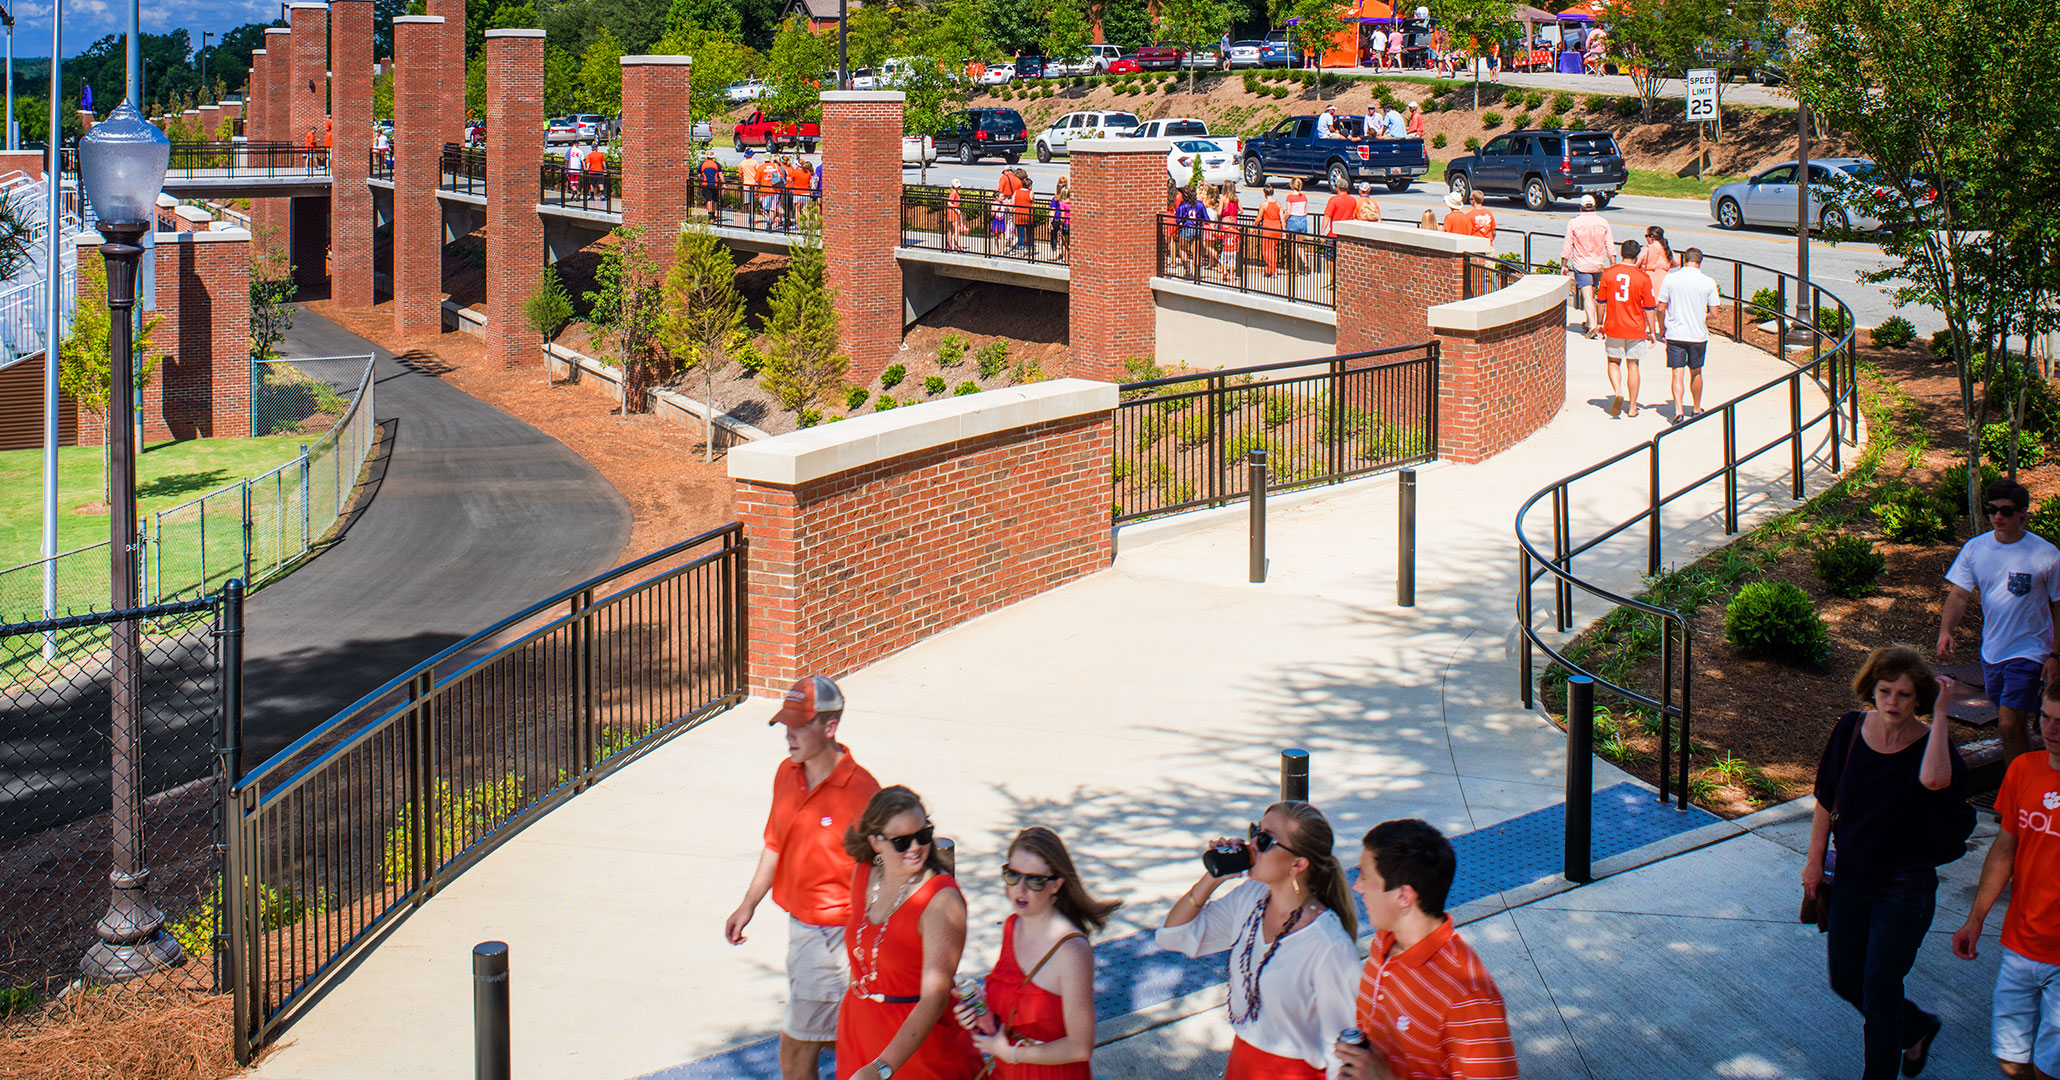 Clemson University worked with Boudreaux master planners and designers to improve pedestrian traffic building the pedestrian walkway past the famous Memorial Stadium.